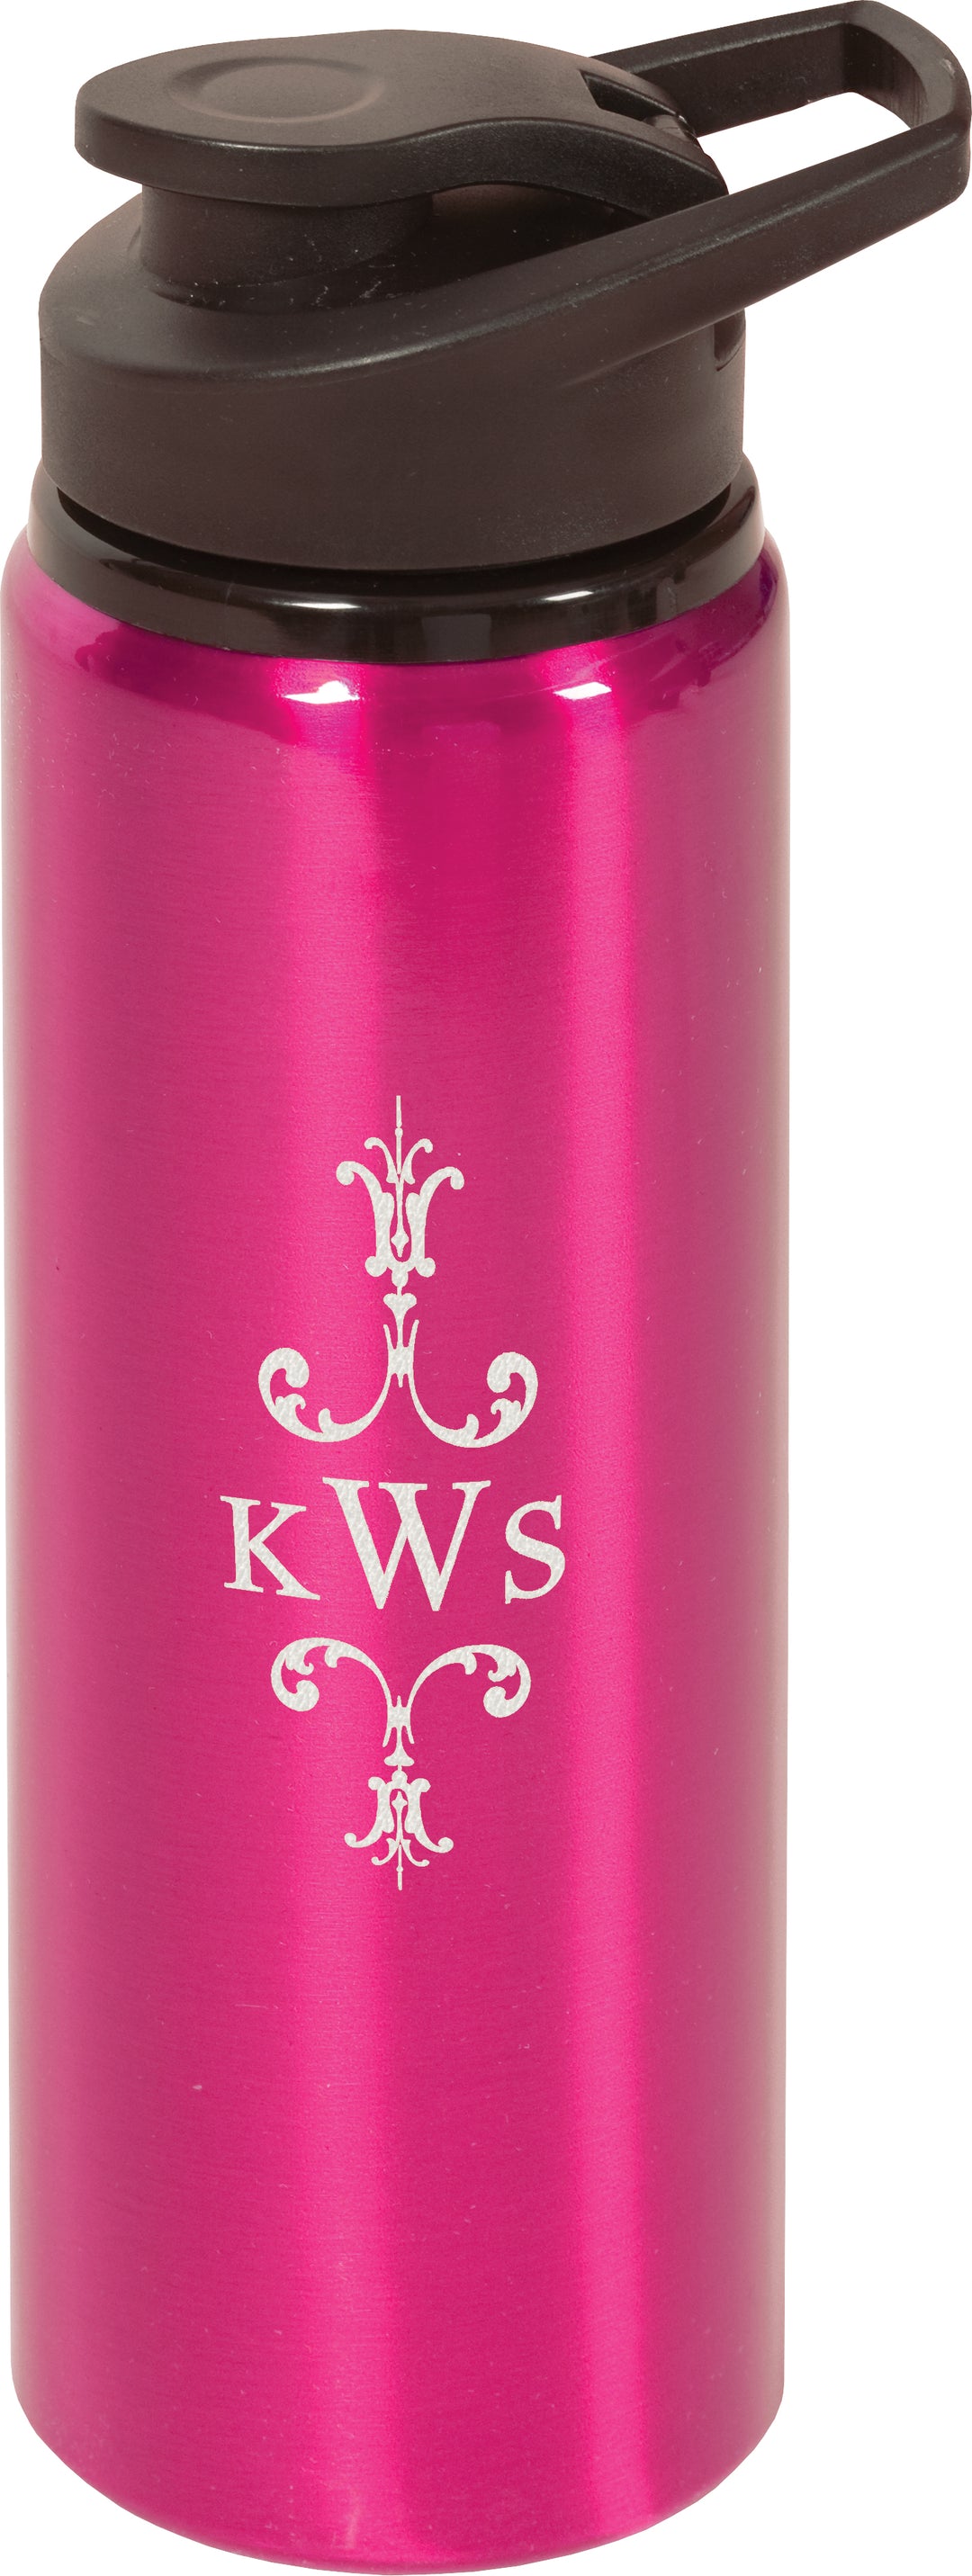 Personalized Pink Water Bottle 26 oz.